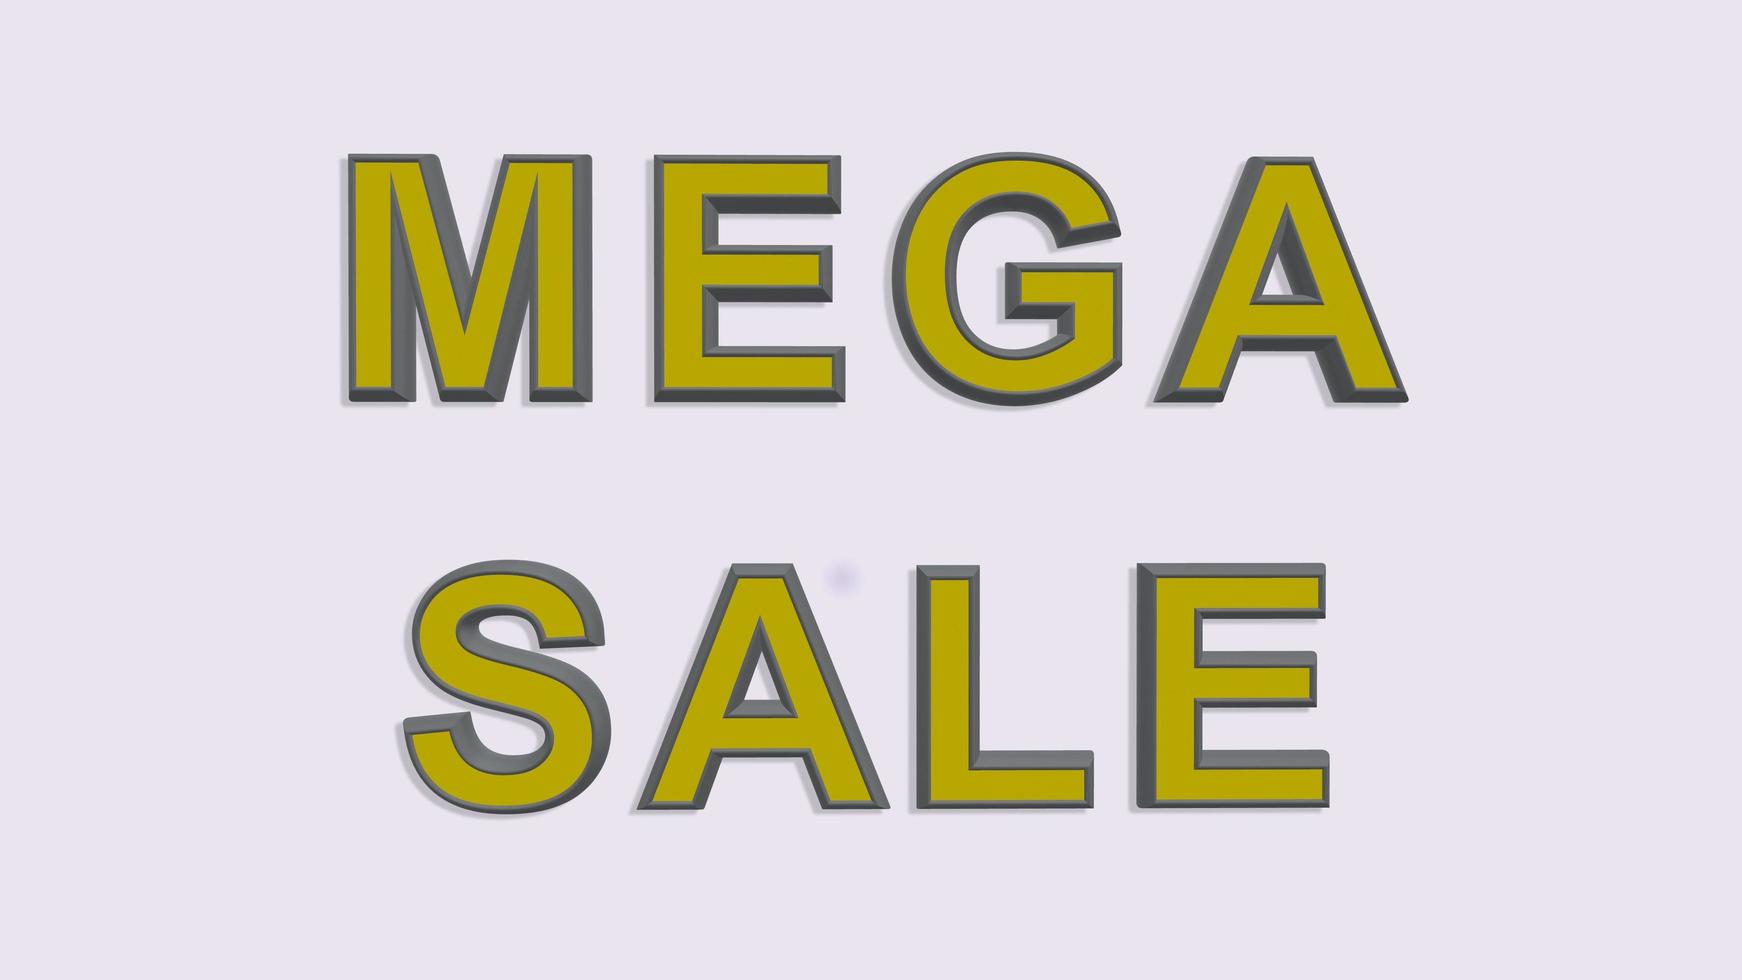 Mega sale banner with white background for special offers, sales photo